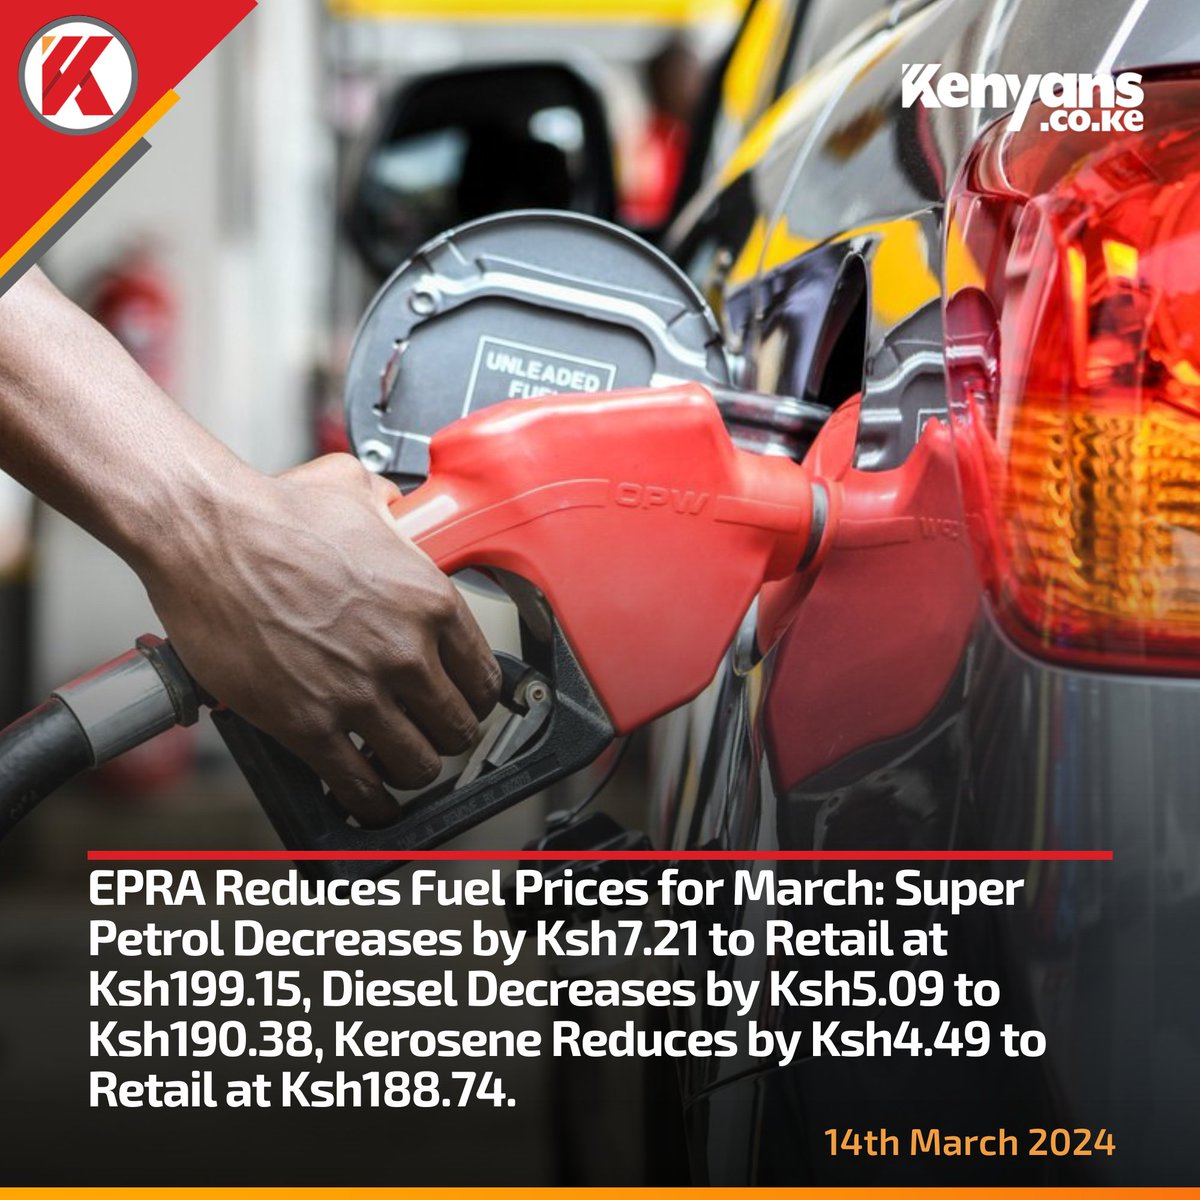 EPRA reduces fuel prices for March: Super Petrol by Ksh7.21, Diesel by Ksh5.09 and Kerosene by Ksh4.49